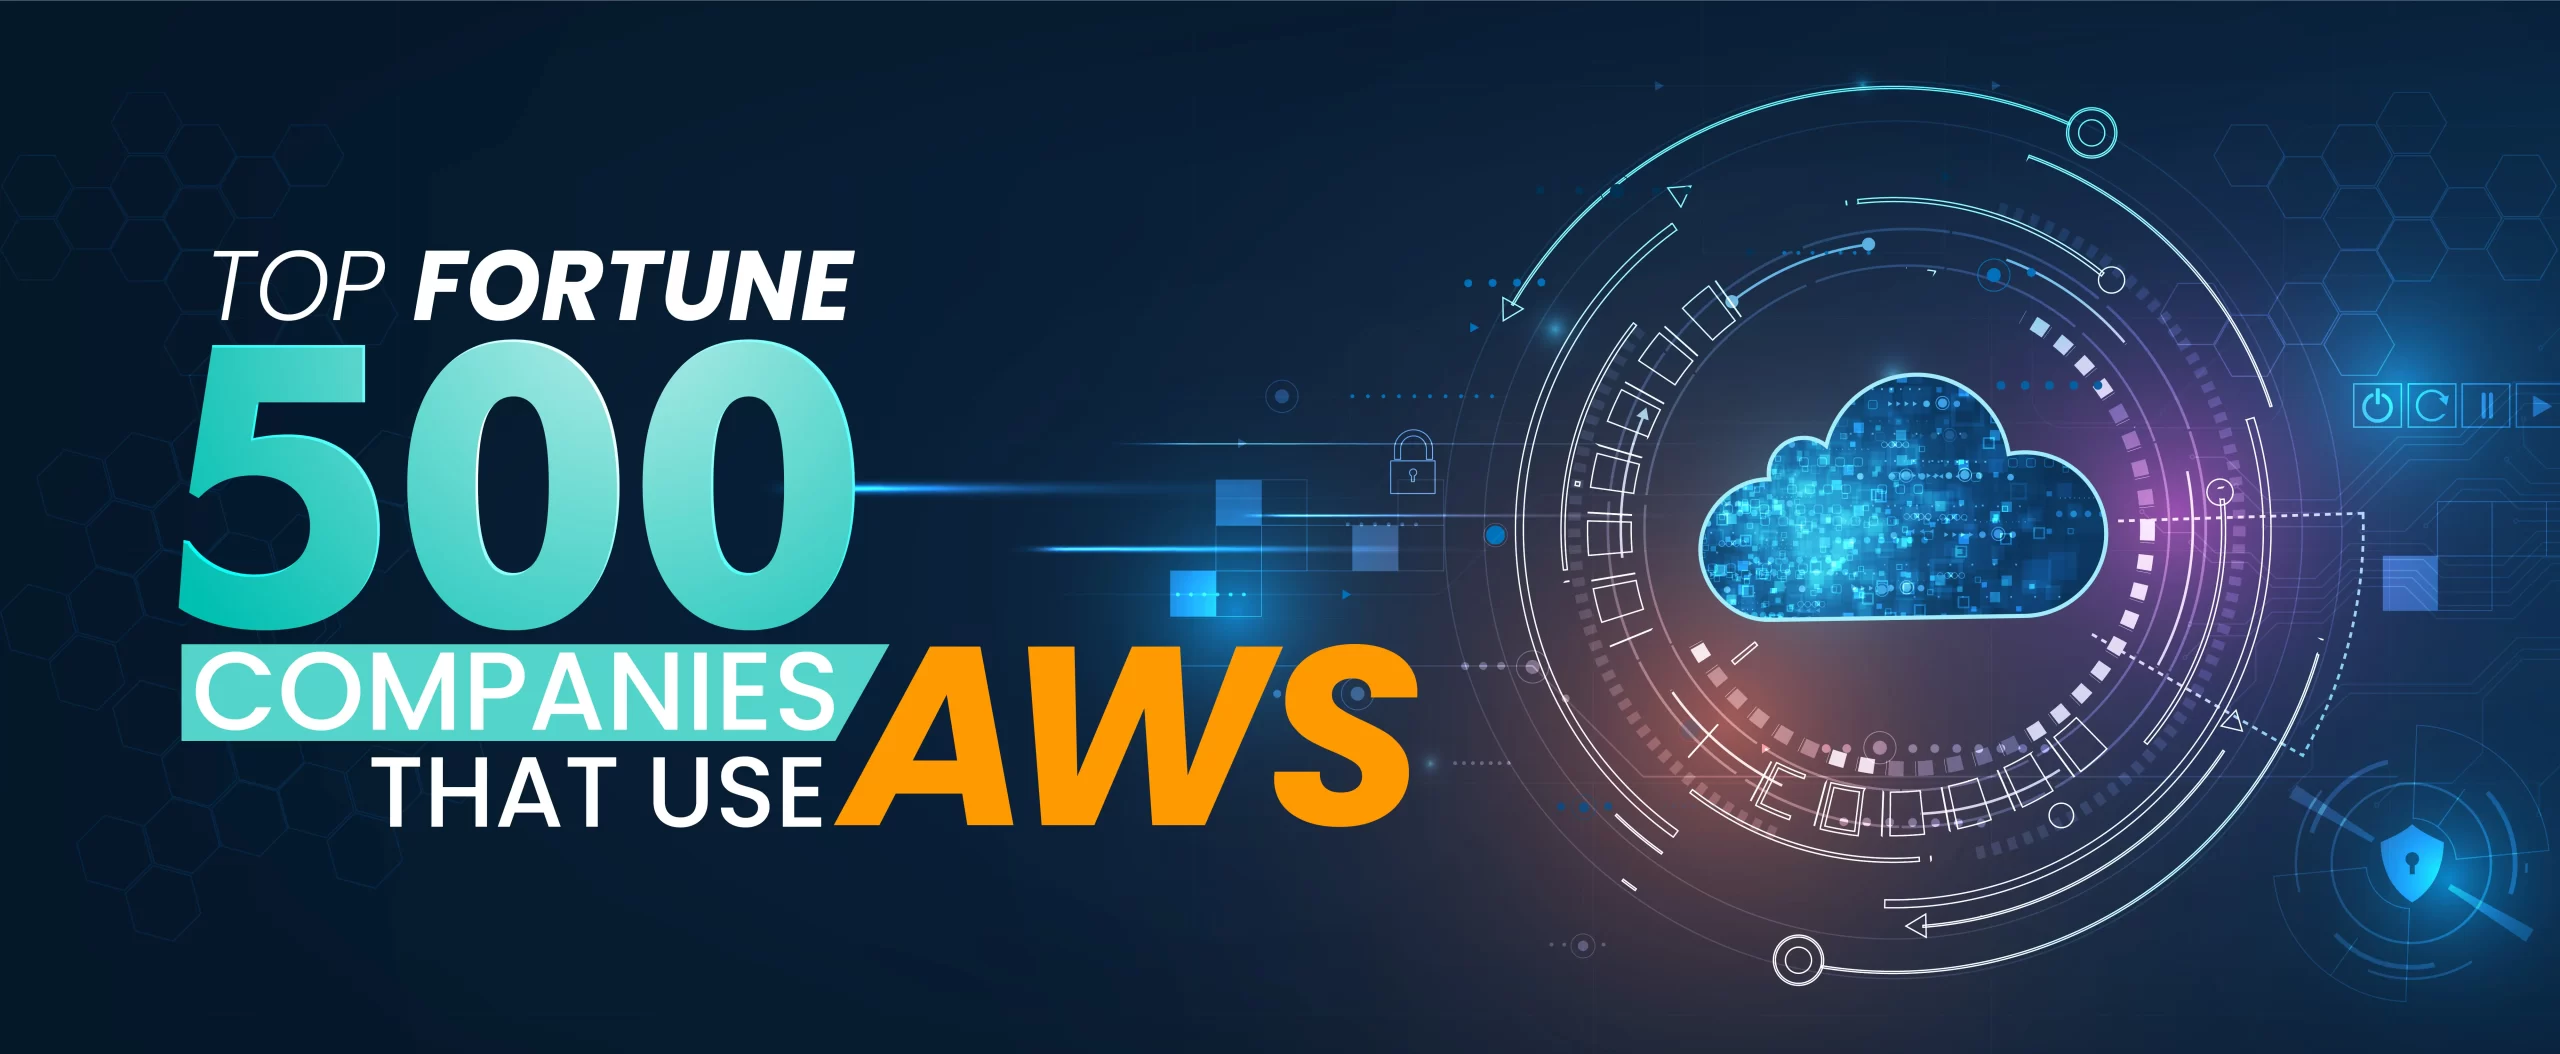 Top Fortune 500 Companies that Use AWS